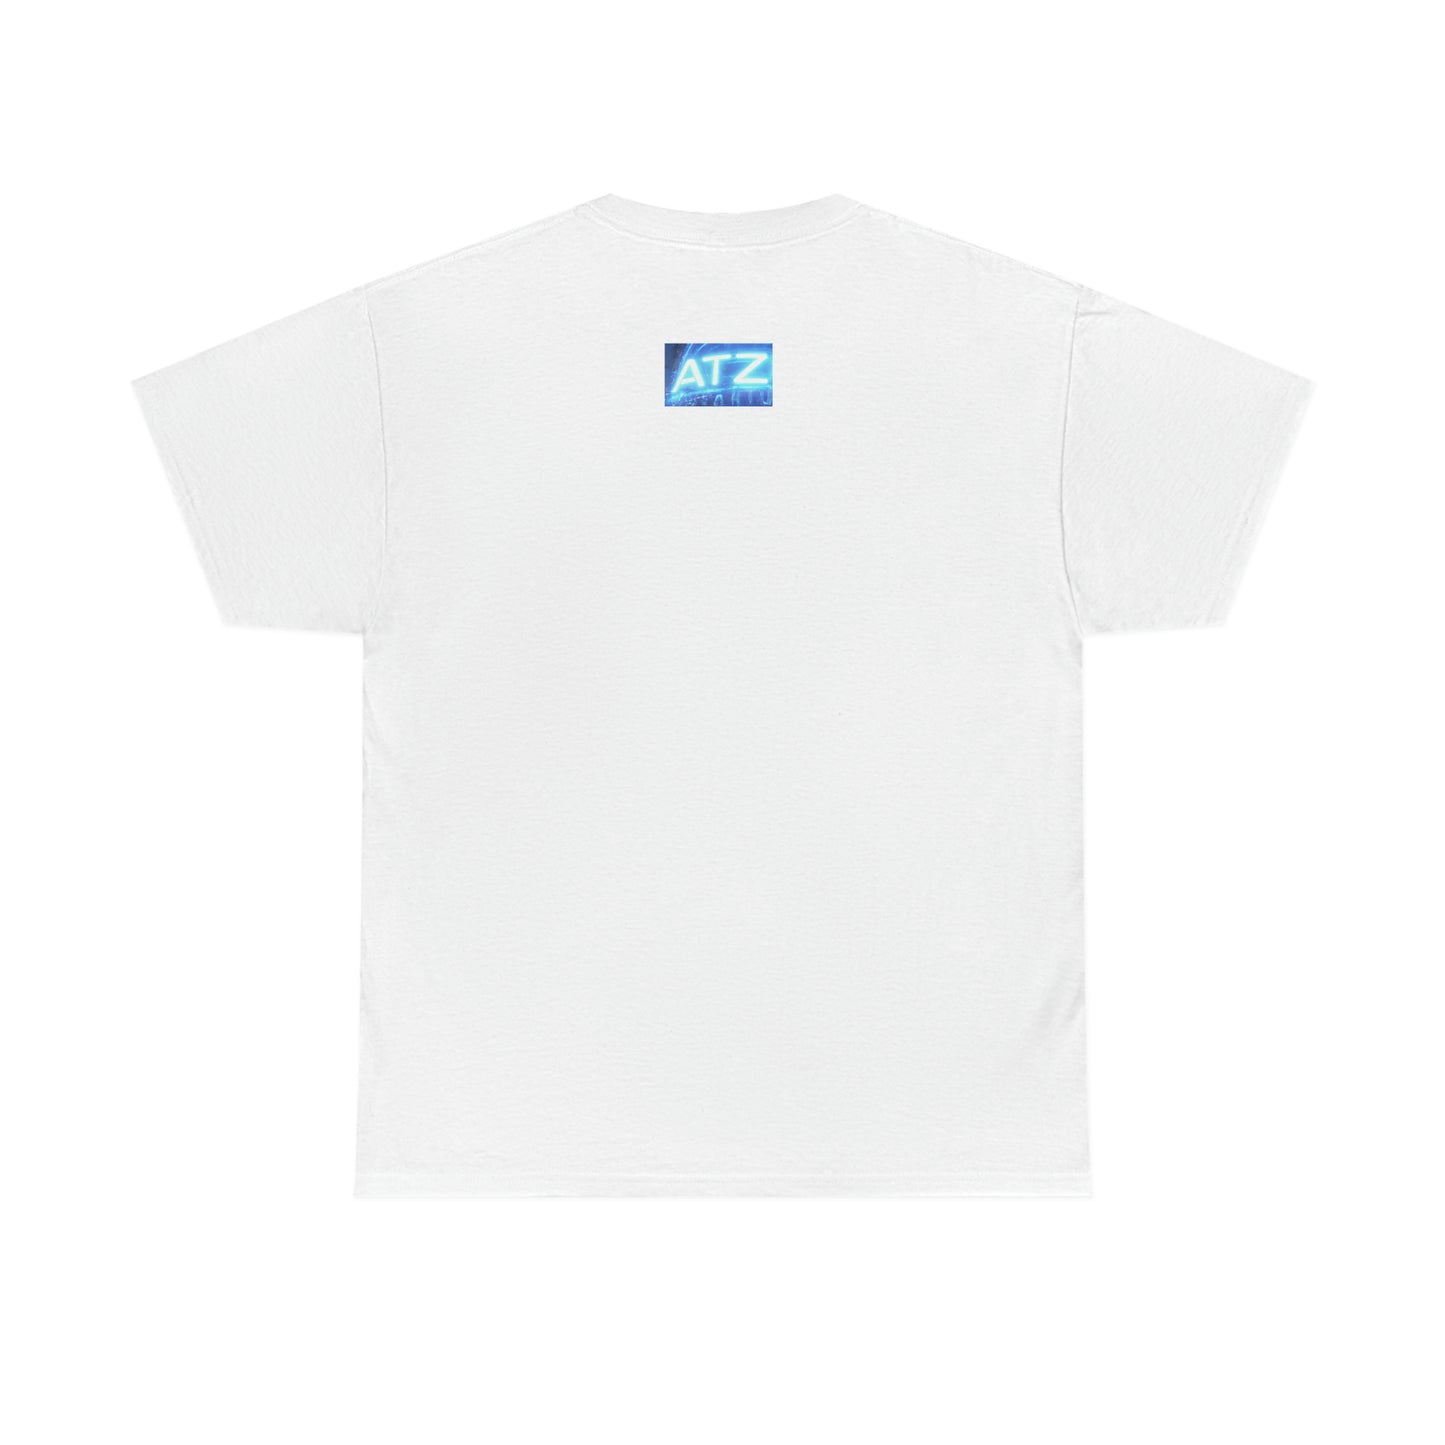 Atziluth Gallery "Burnout" T-Shirt